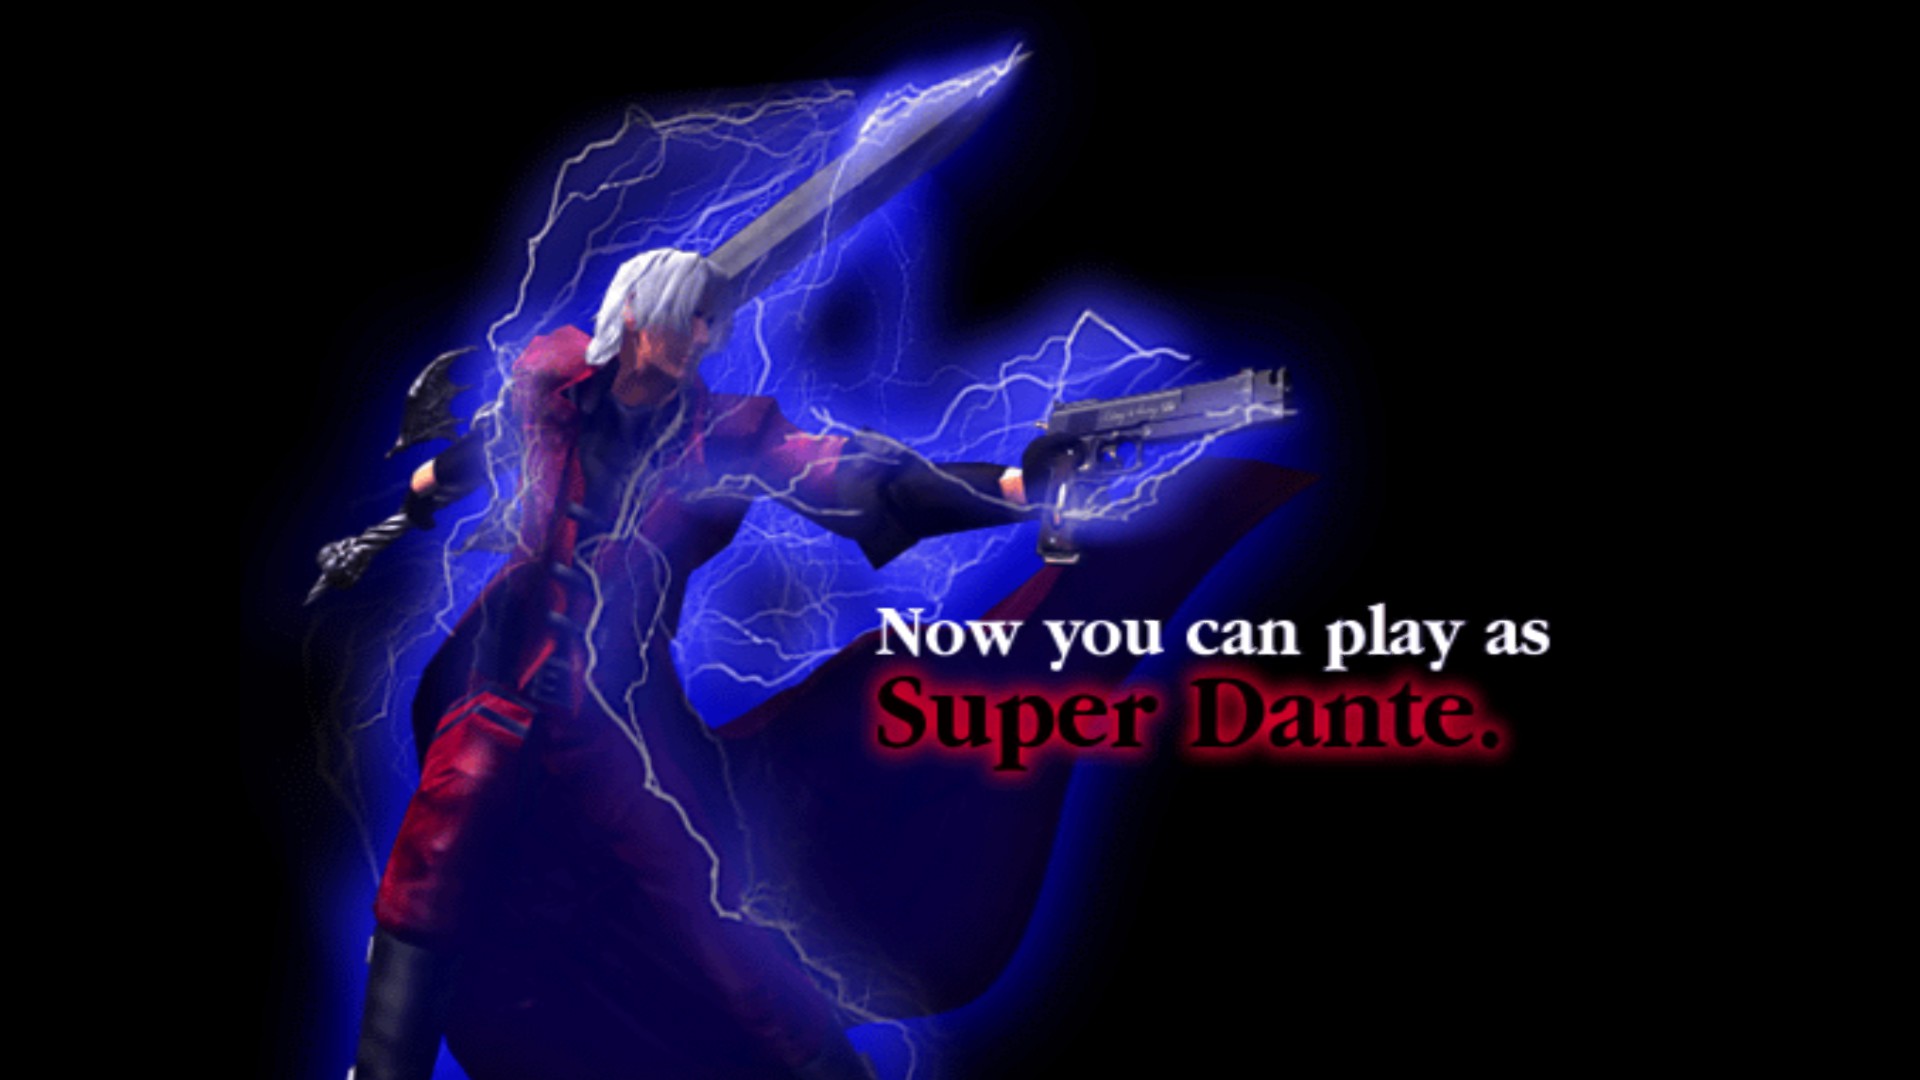 DEVIL MAY CRY 2 (DANTE MUST DIE DIFFICULTY ) PART 1. 